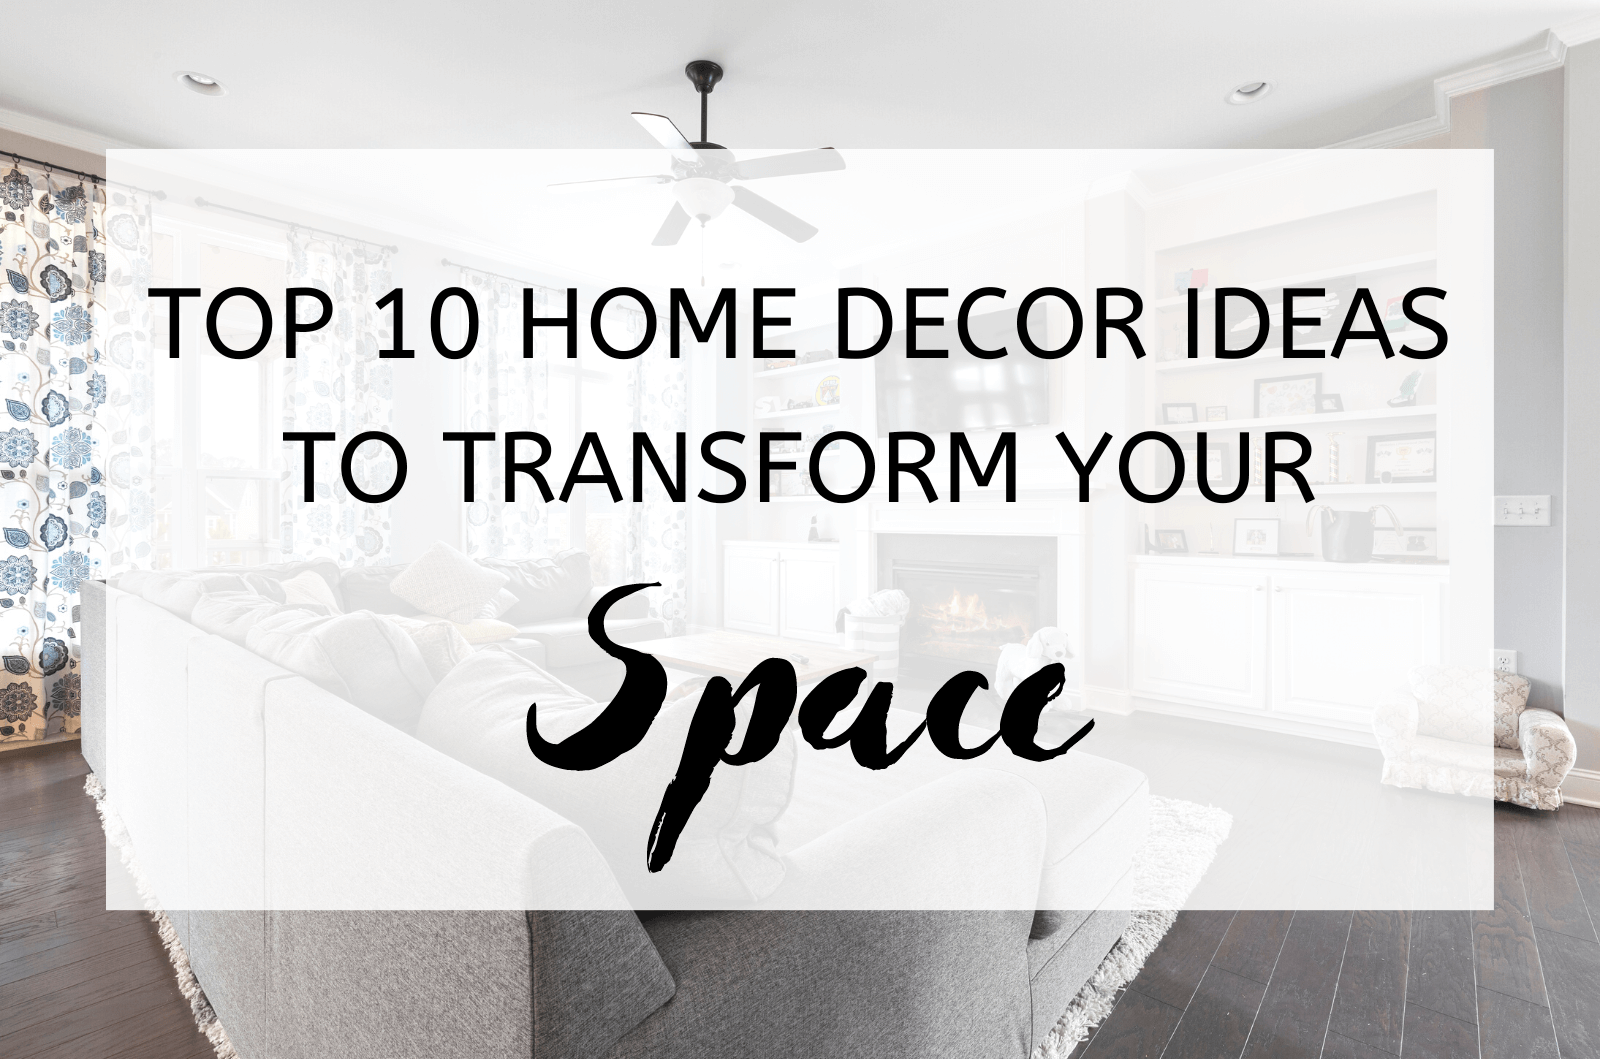 Top 10 Home Decor Ideas To Transform Your Space